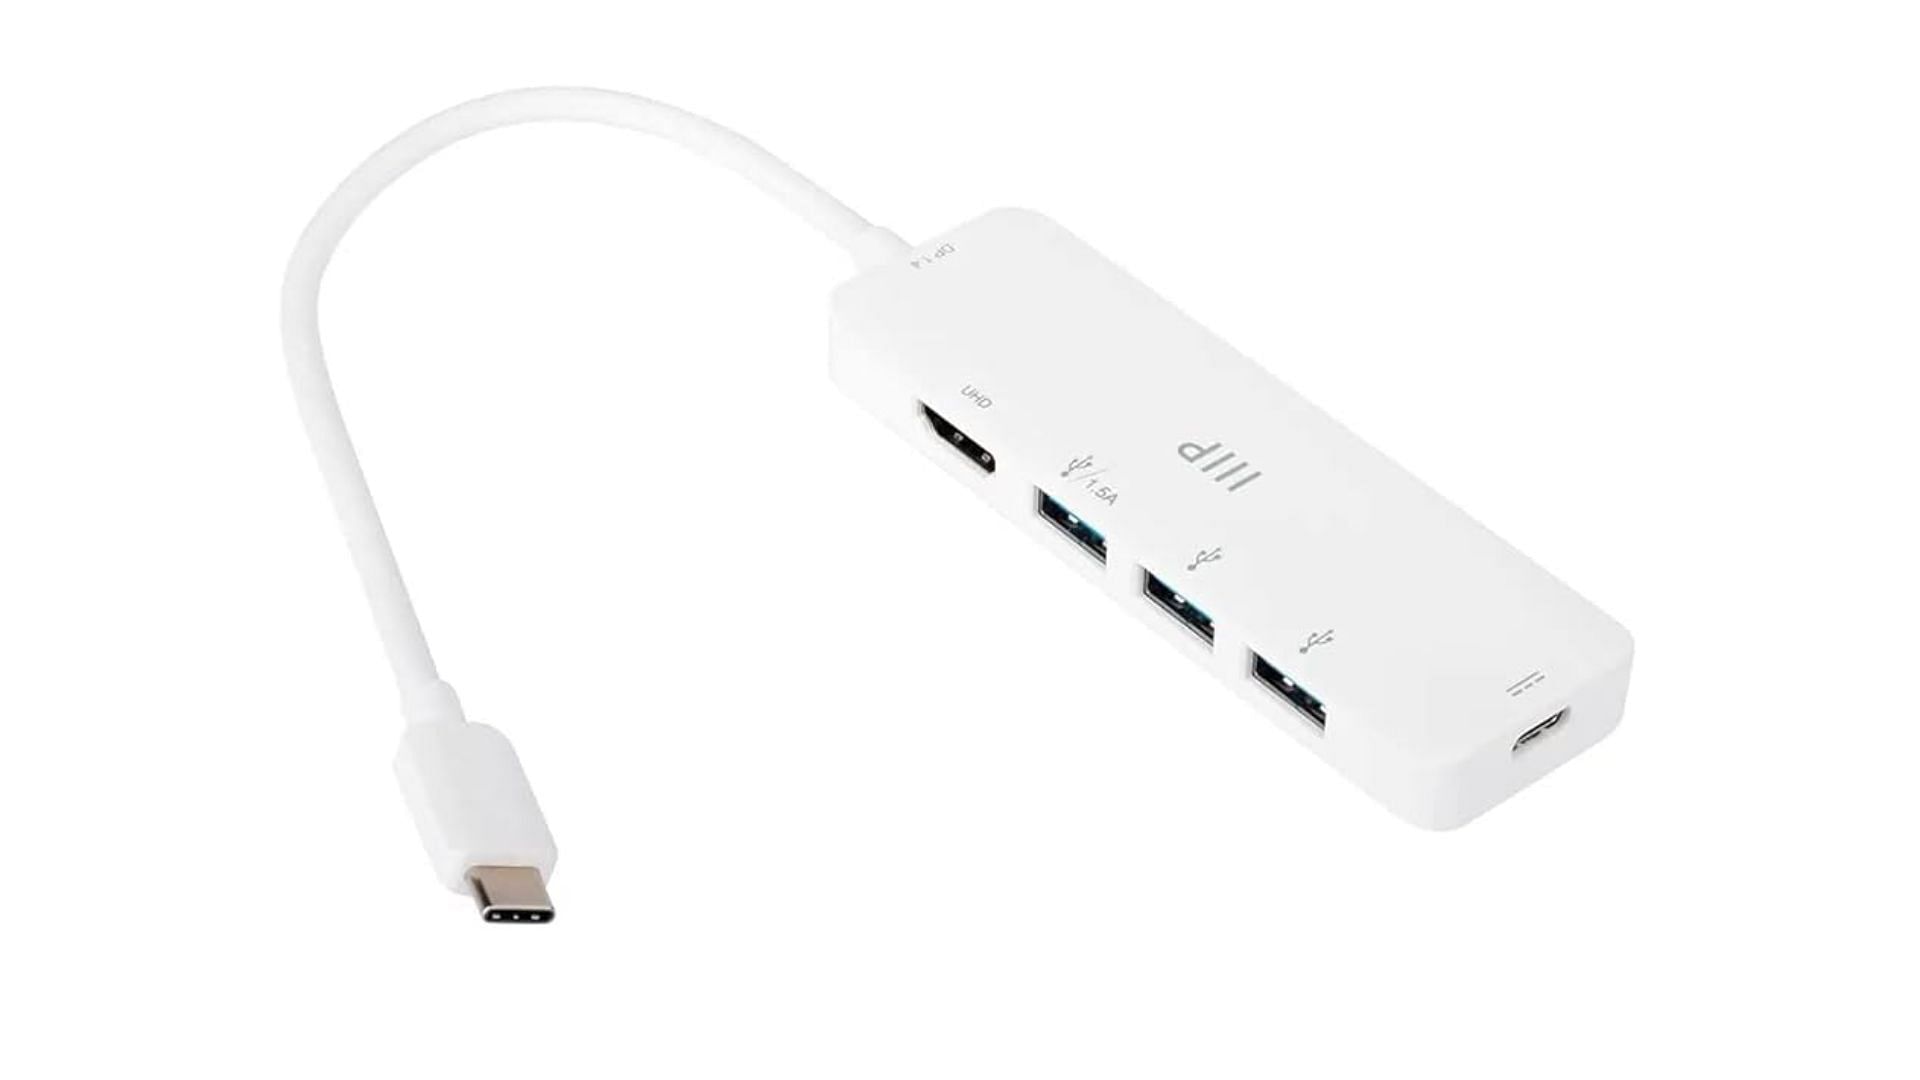 Pocket-friendly adapter to connect various peripherals (Image via Amazon/Monoprice)